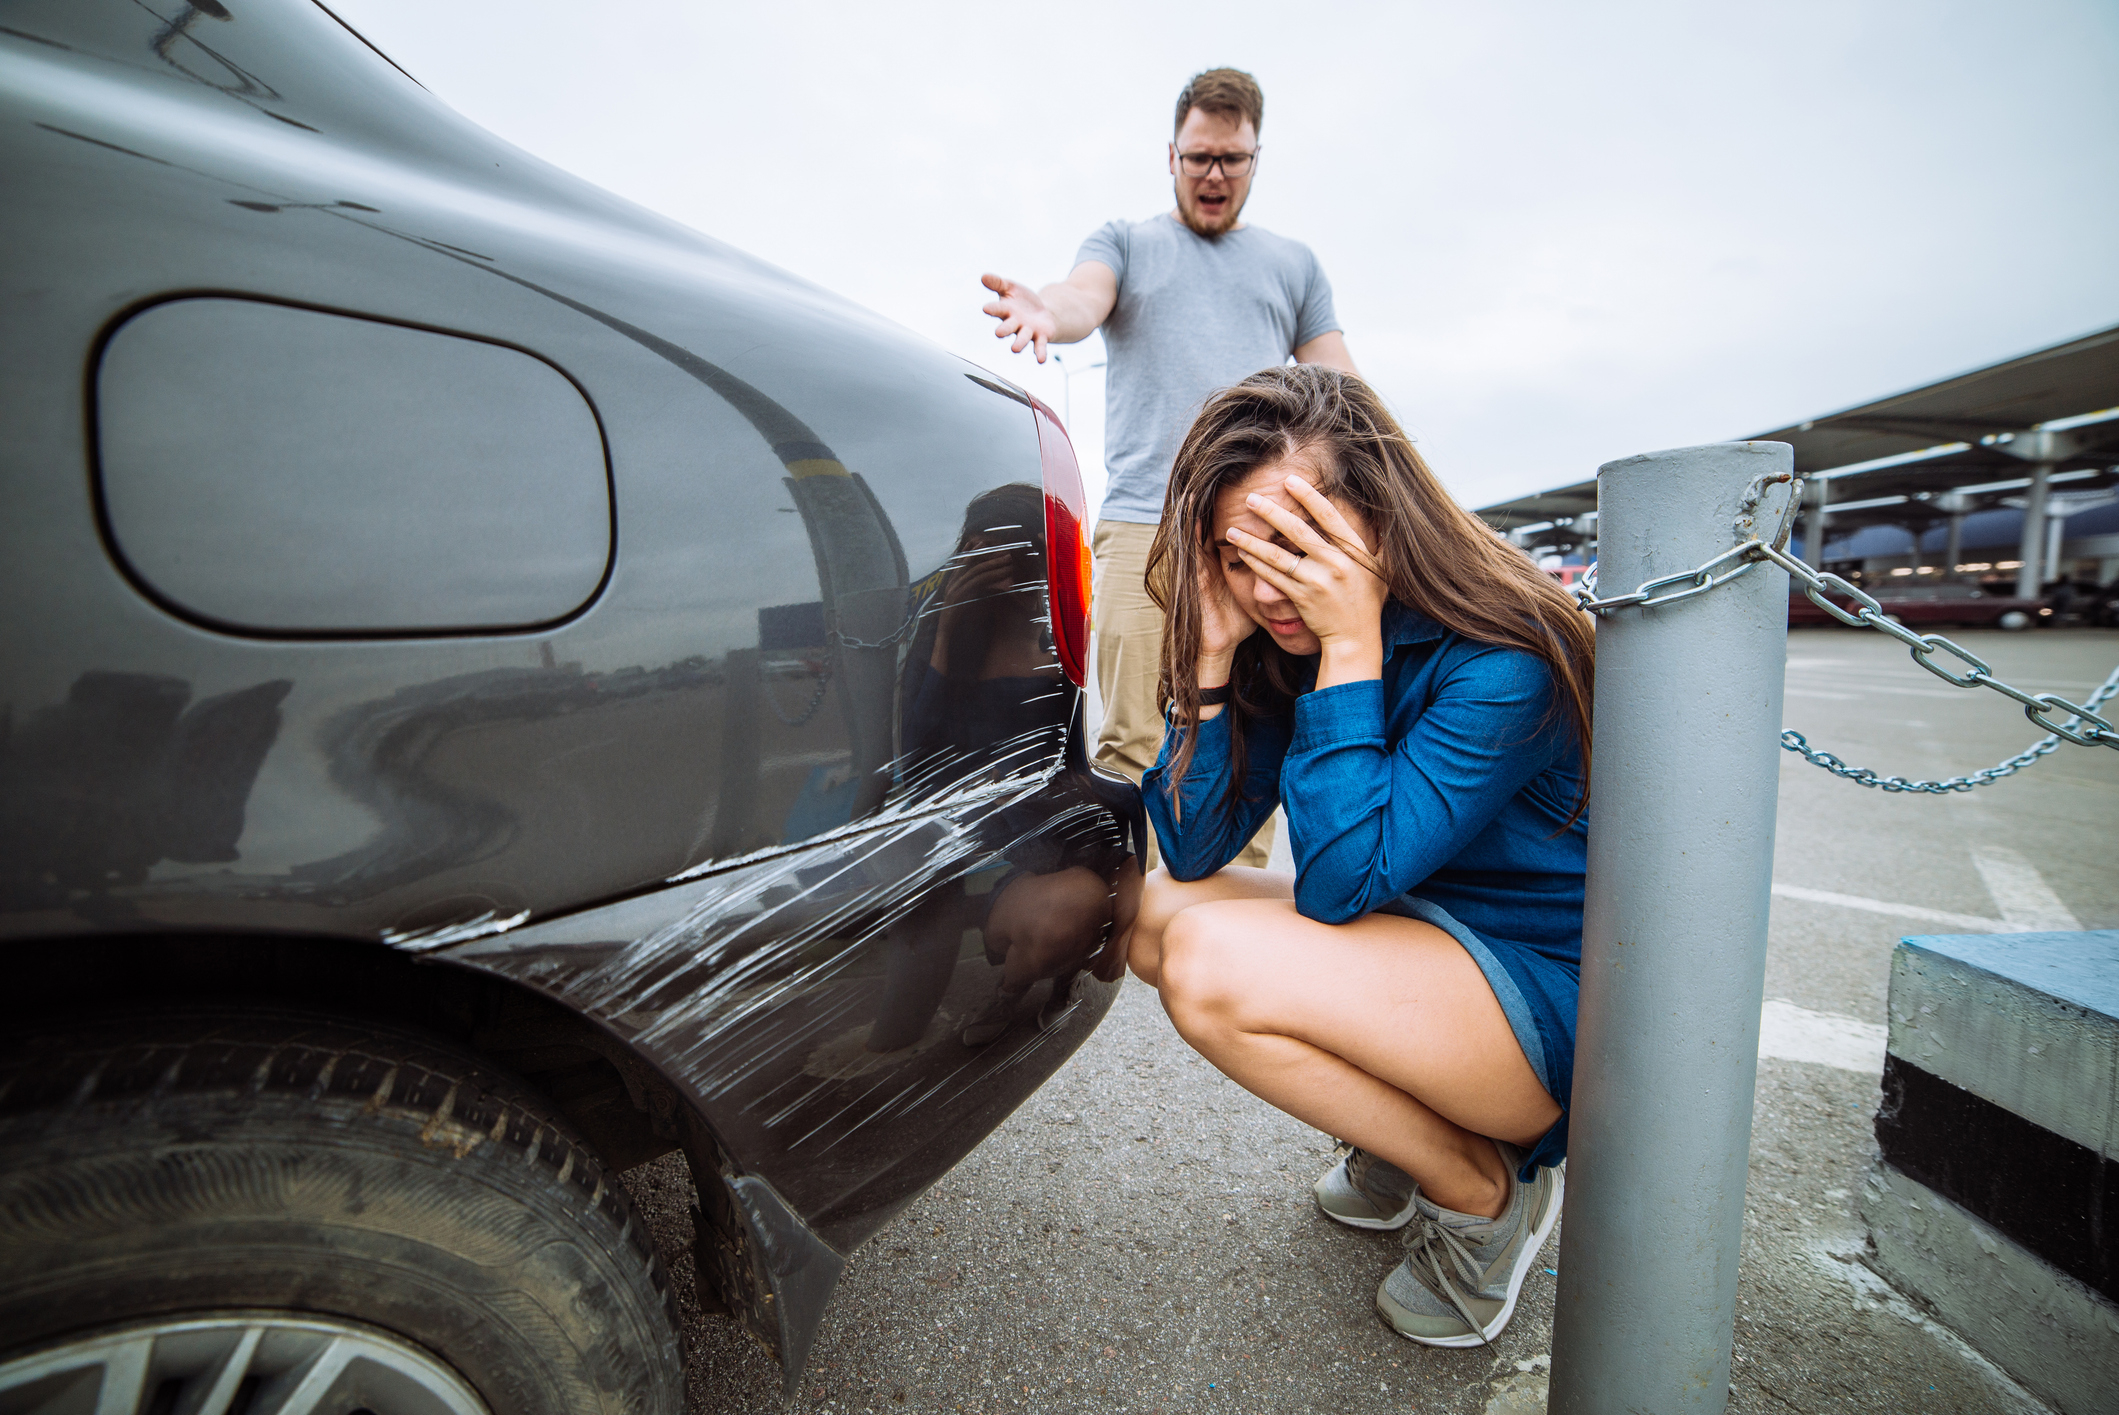 A distressed woman crouches by a scratched rear bumper of a car, covering her face. A man stands behind her, pointing at the damage with a frustrated expression